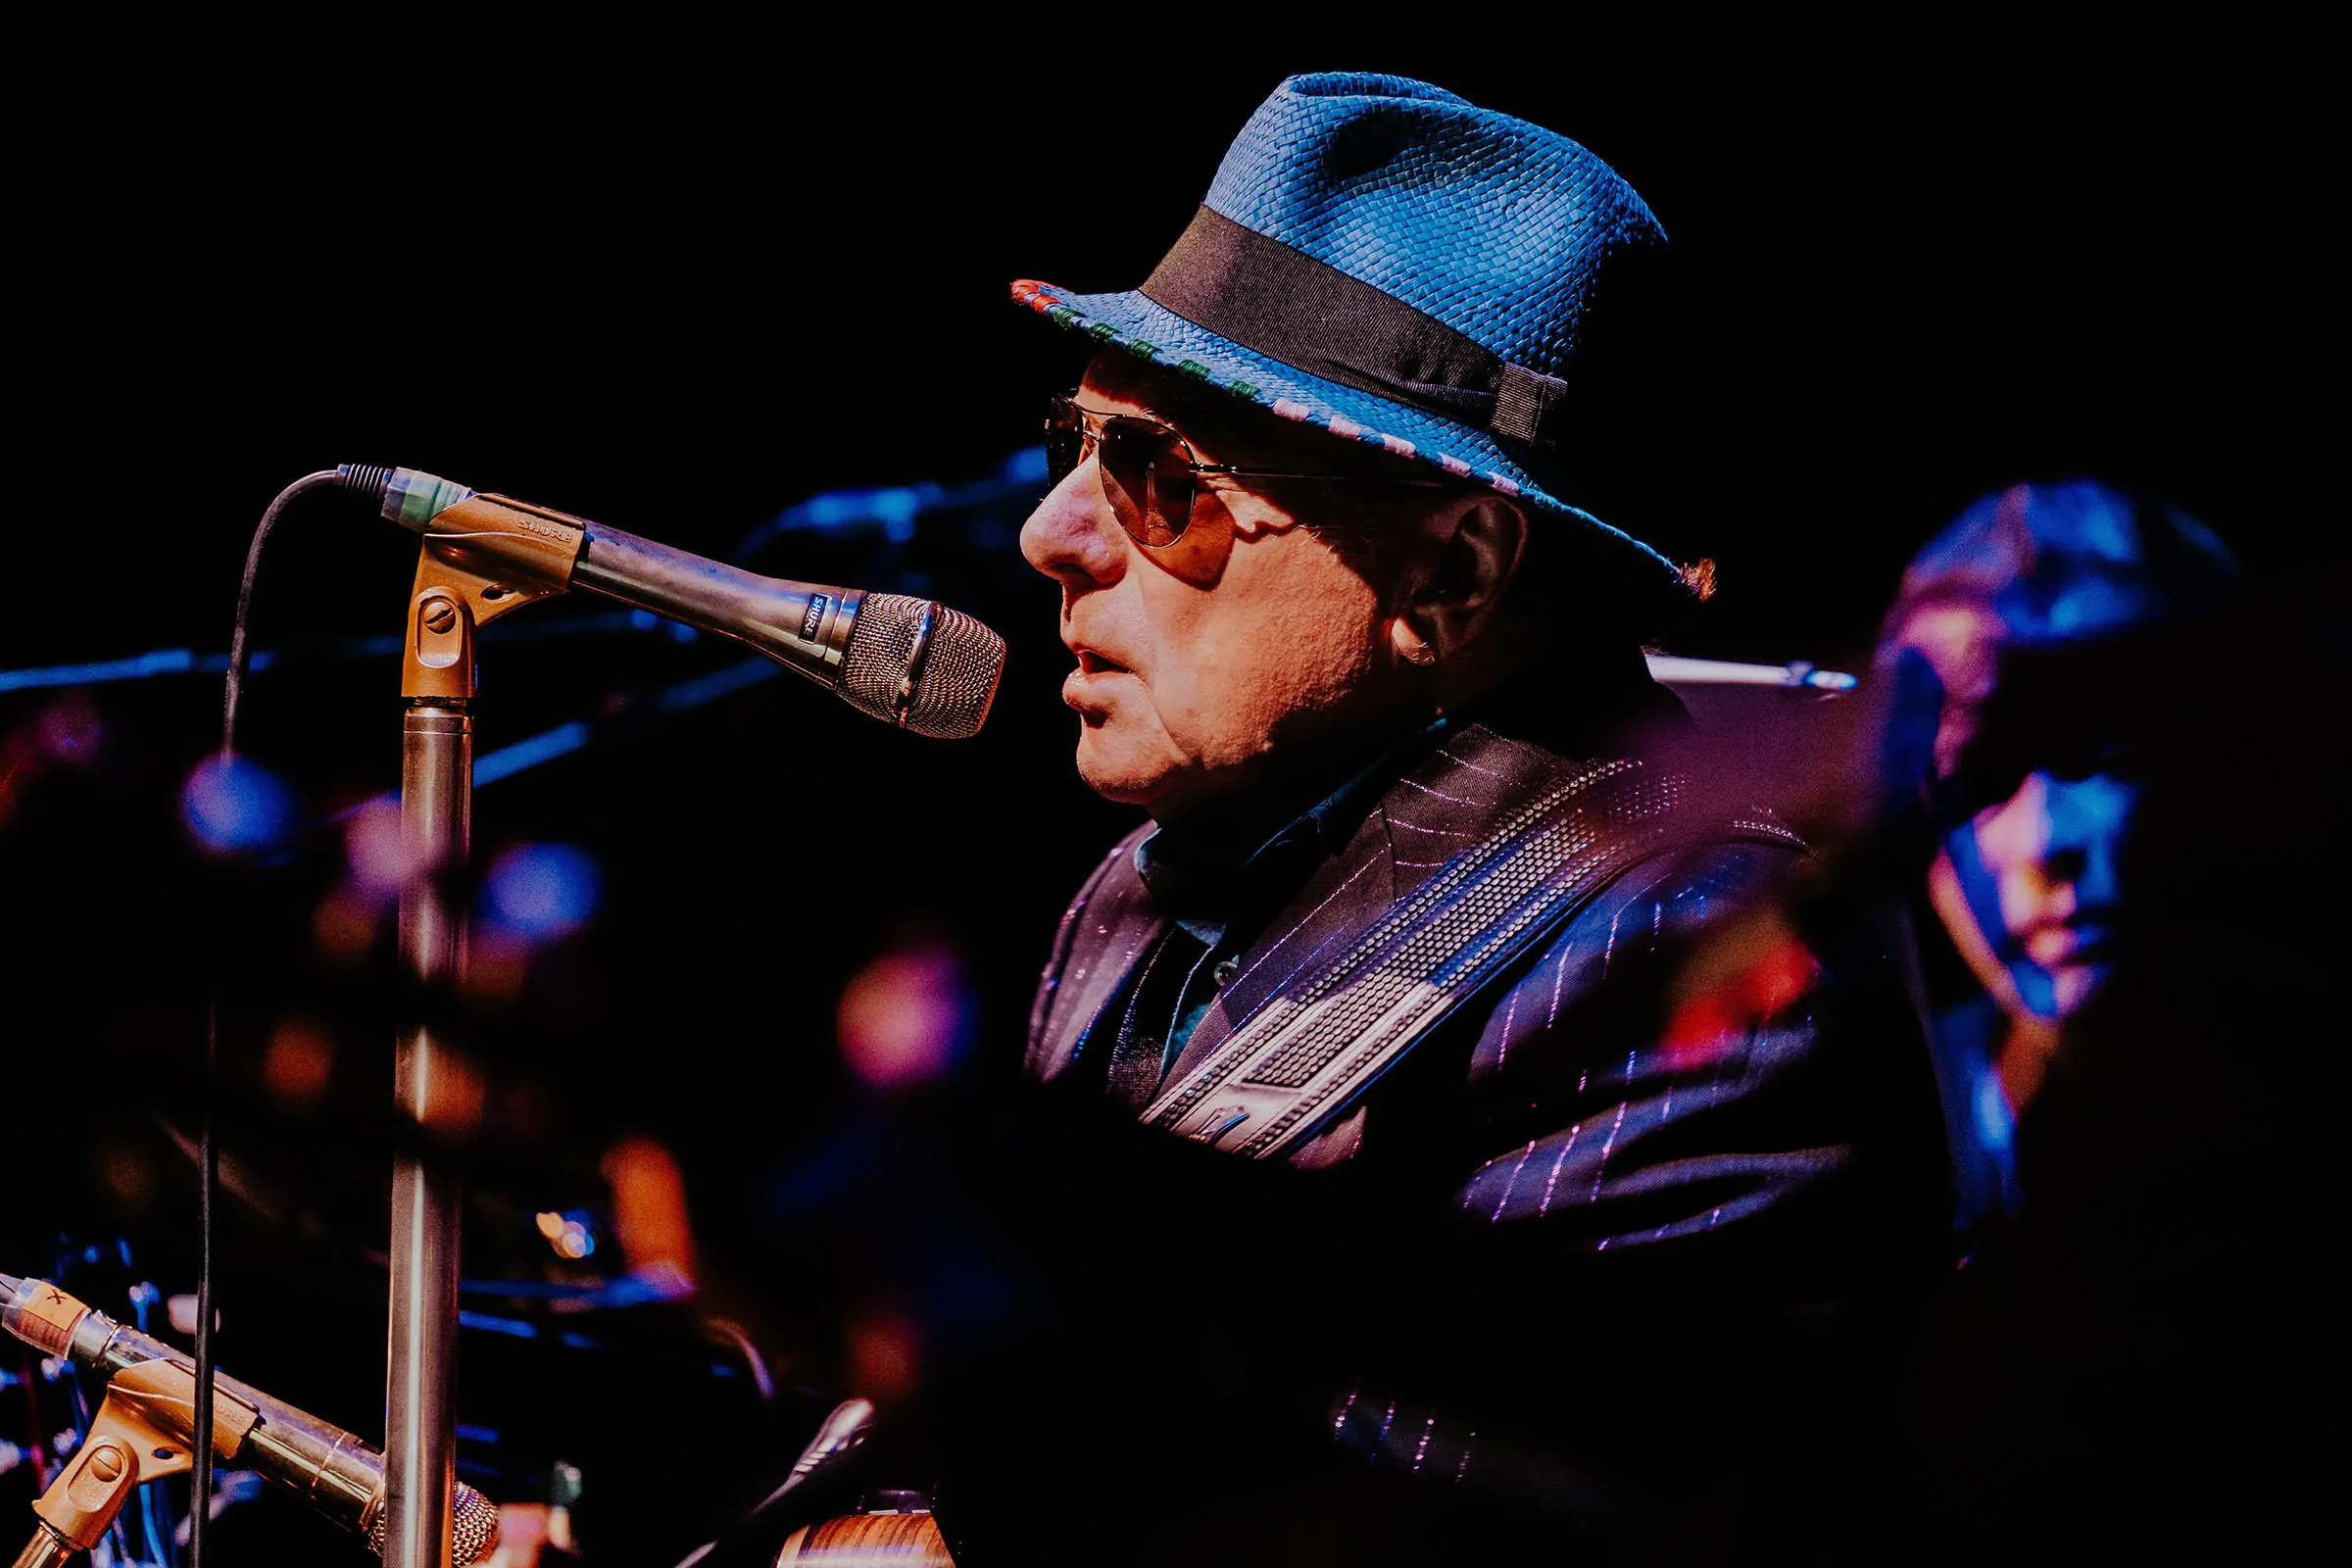 VAN MORRISON announces an extra date at the Millennium Forum on Saturday 9th May